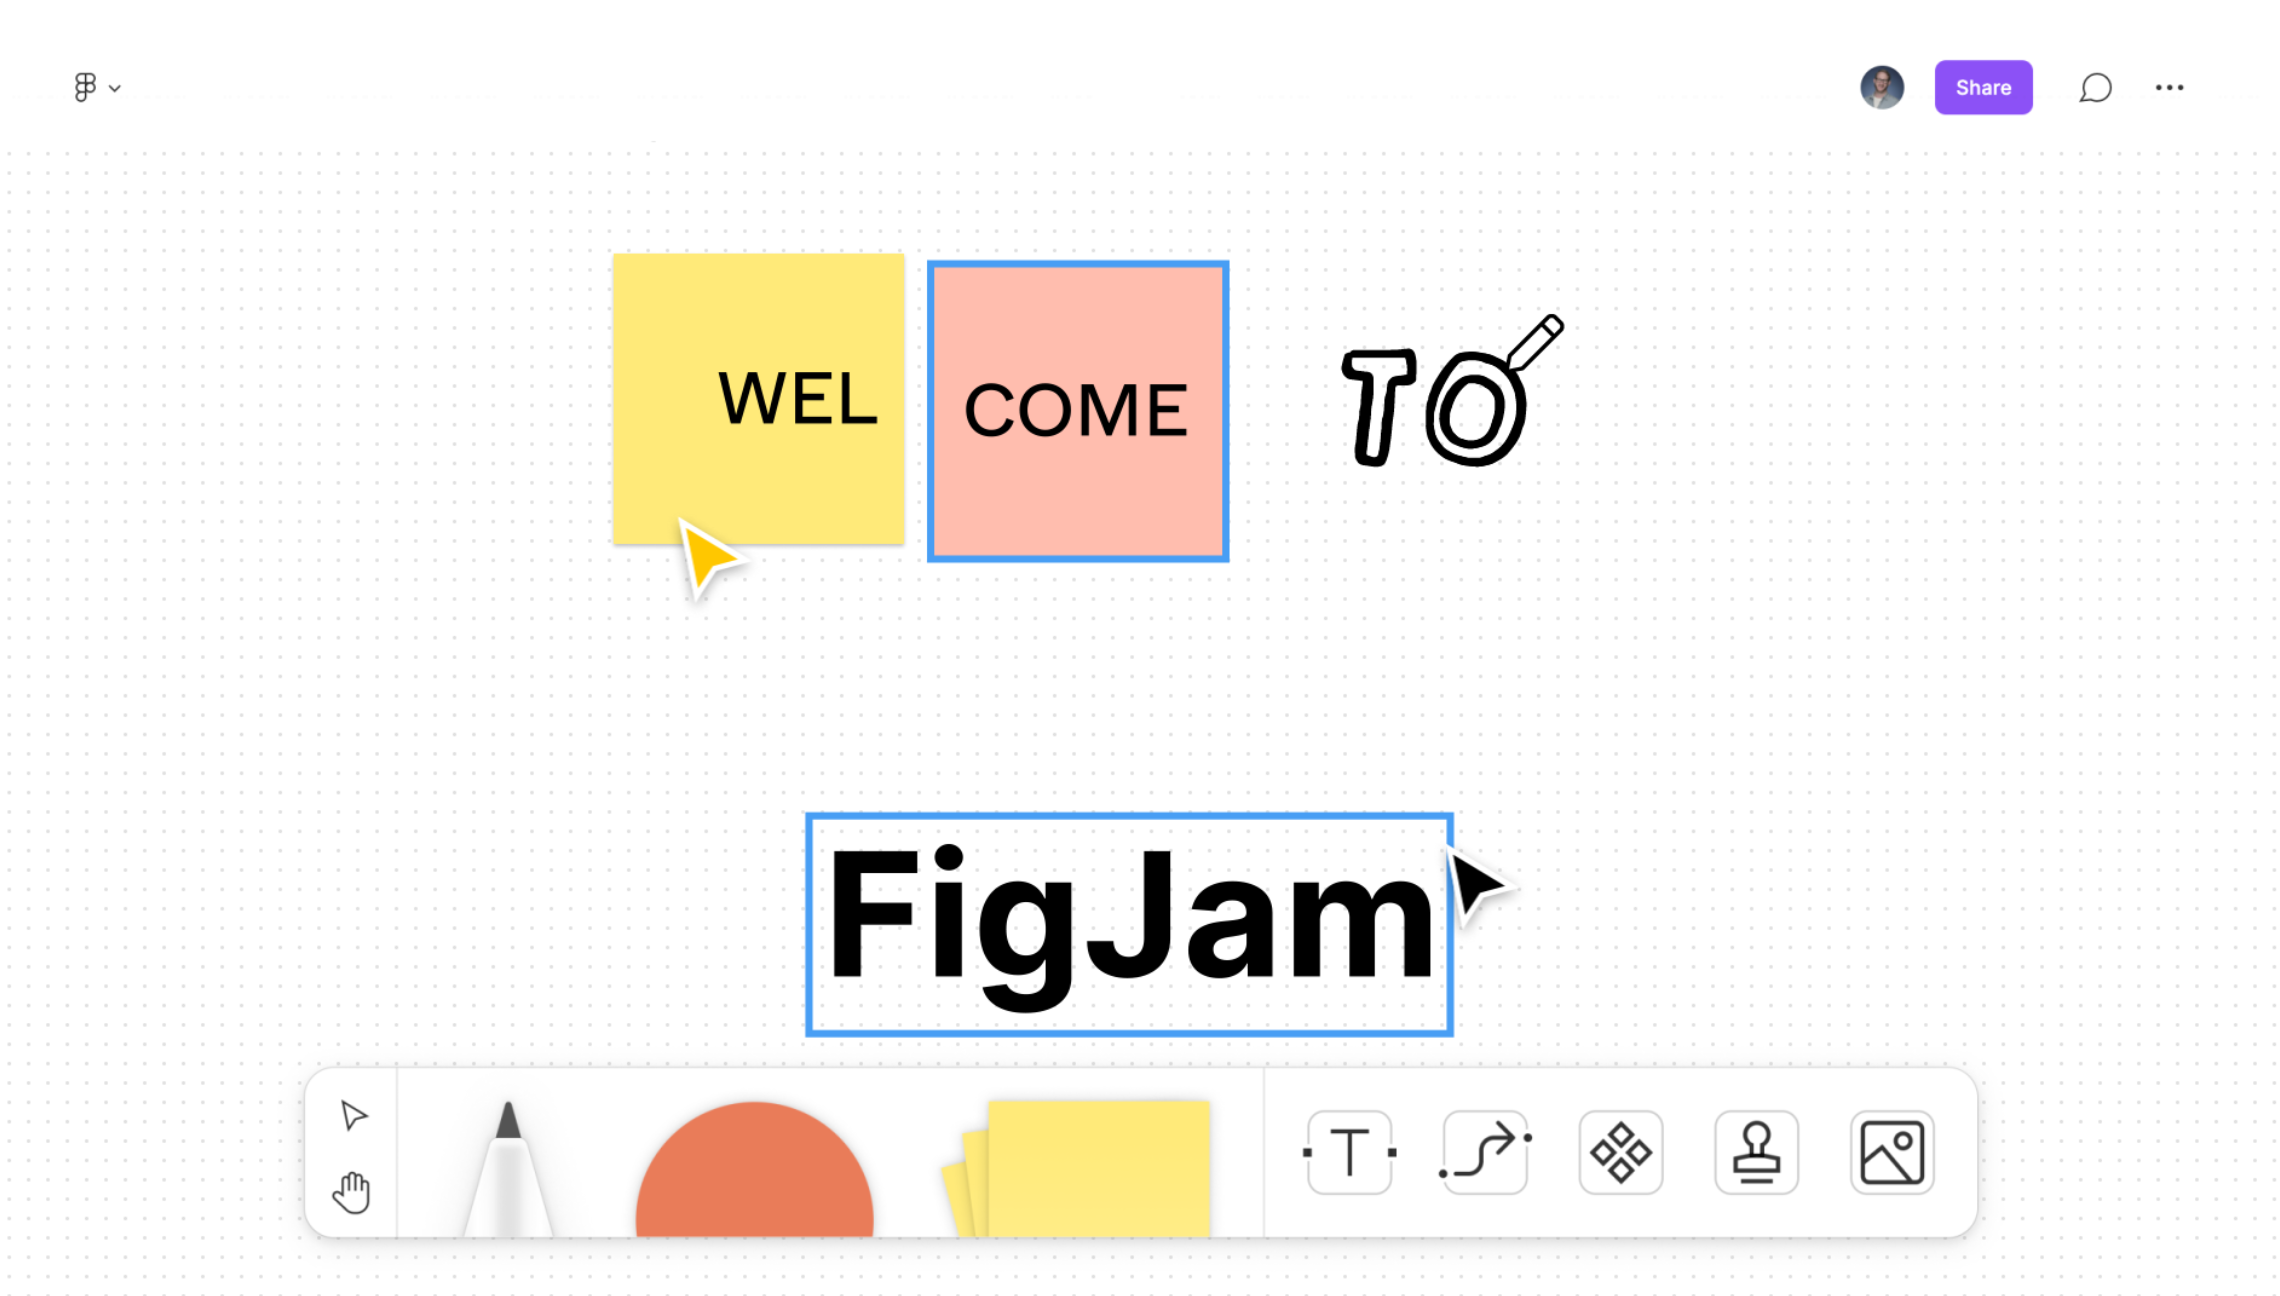 What is FigJam by Figma?